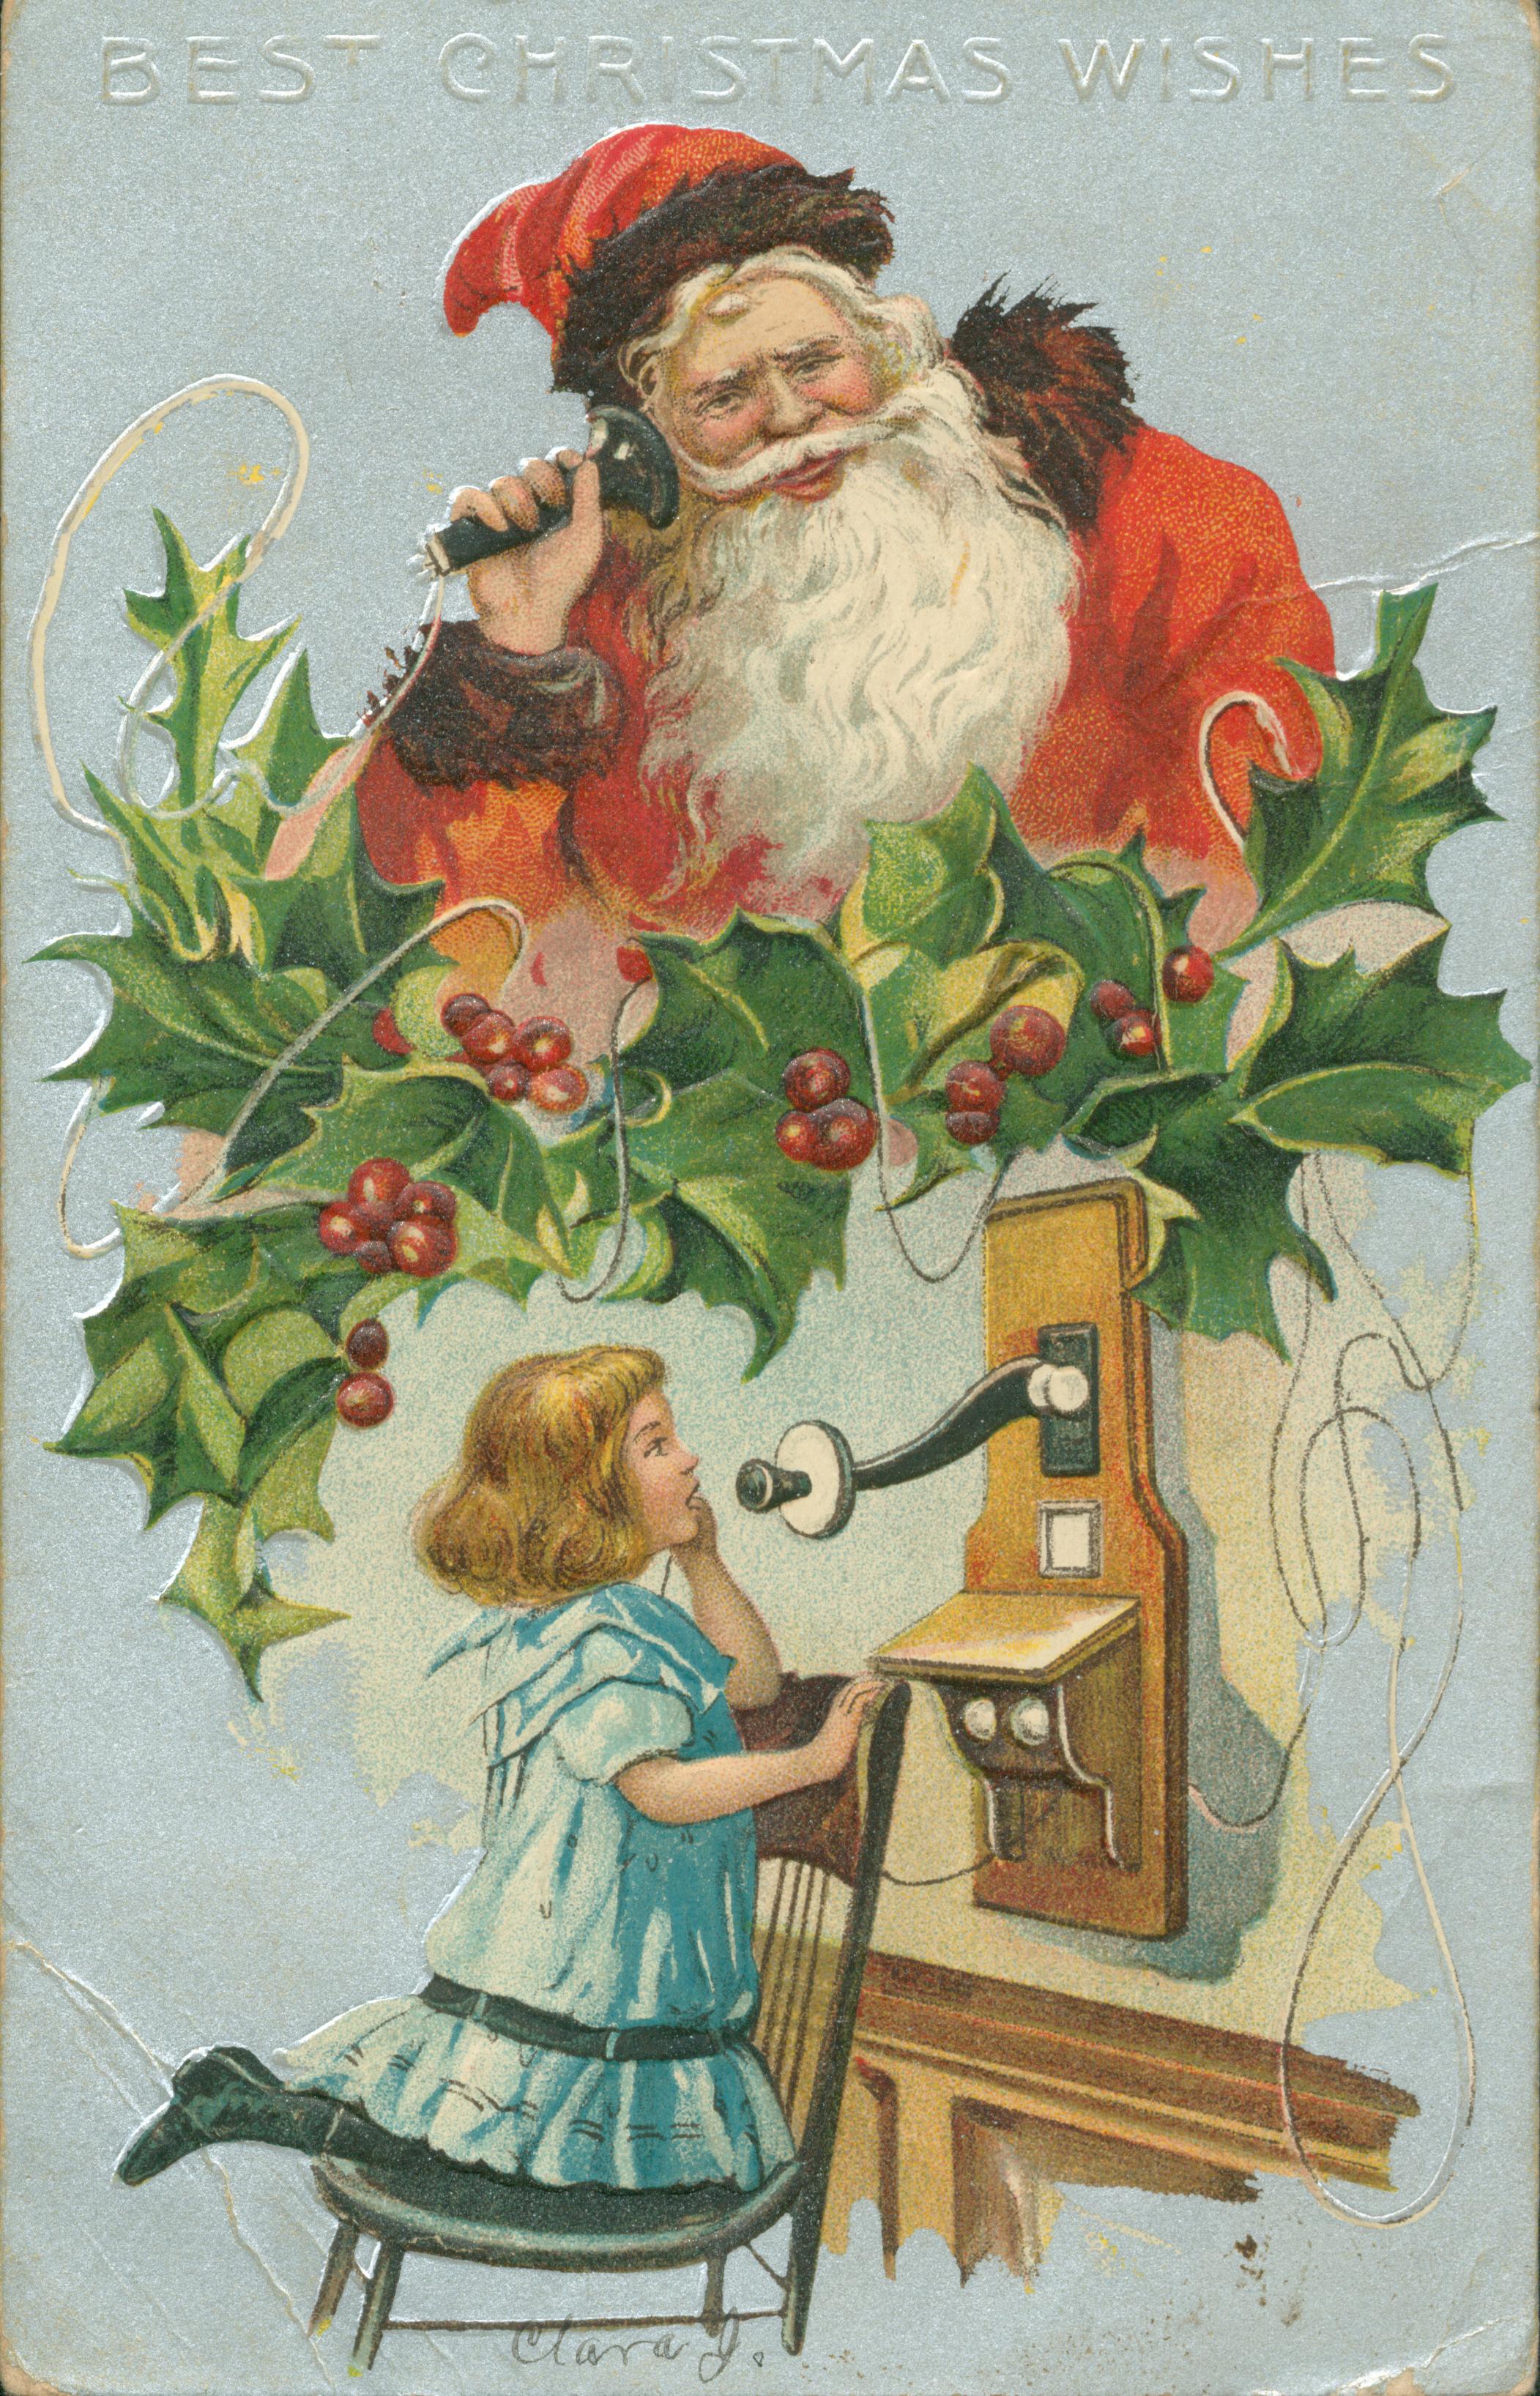 Shows a child making a phone call to Santa